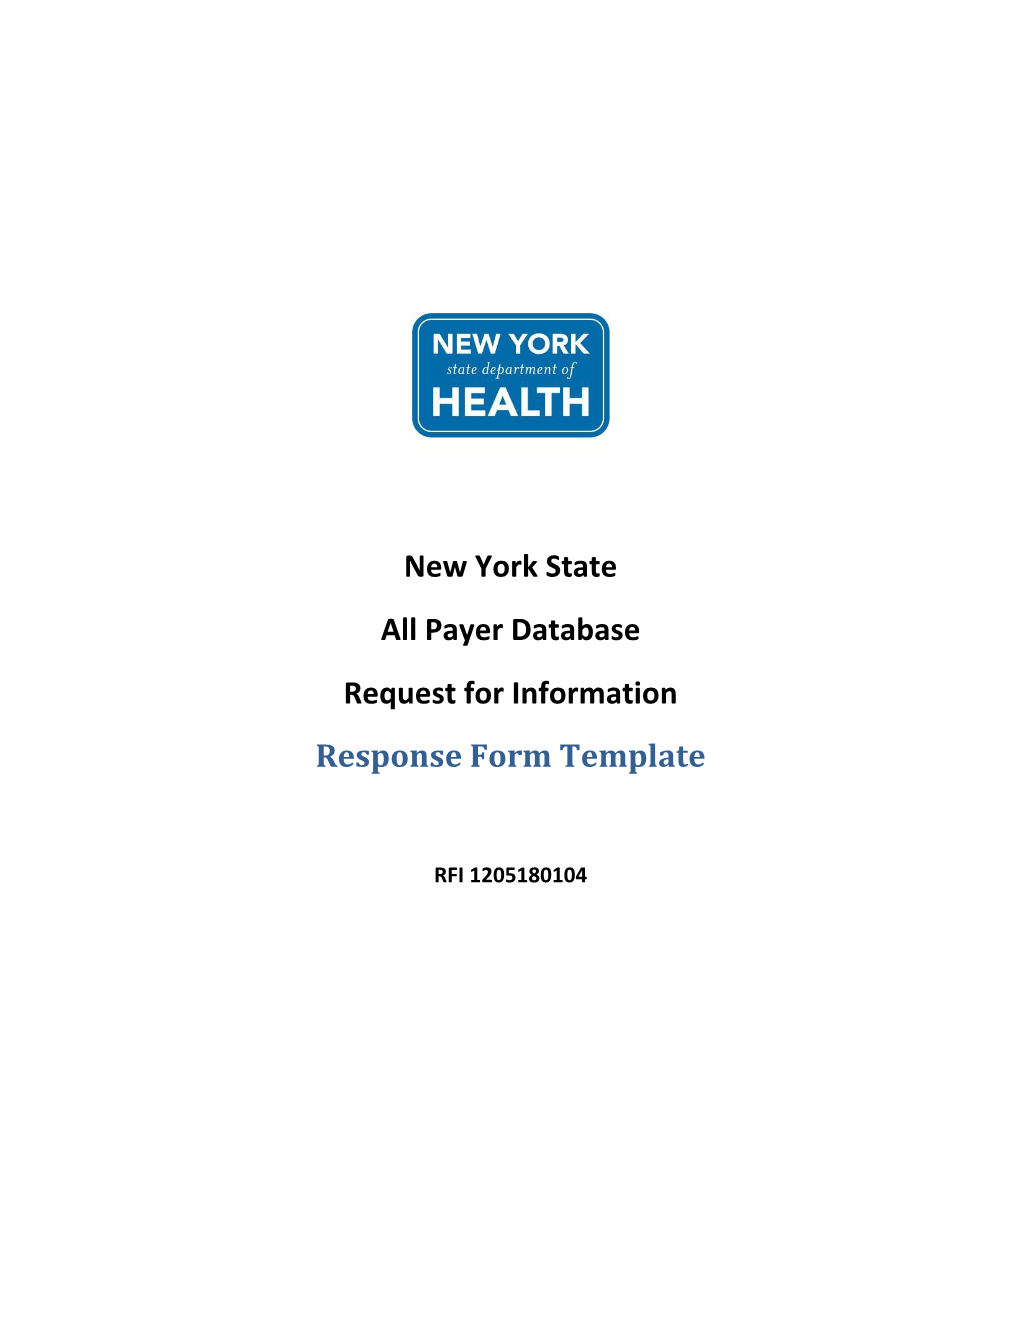 All Payer Database